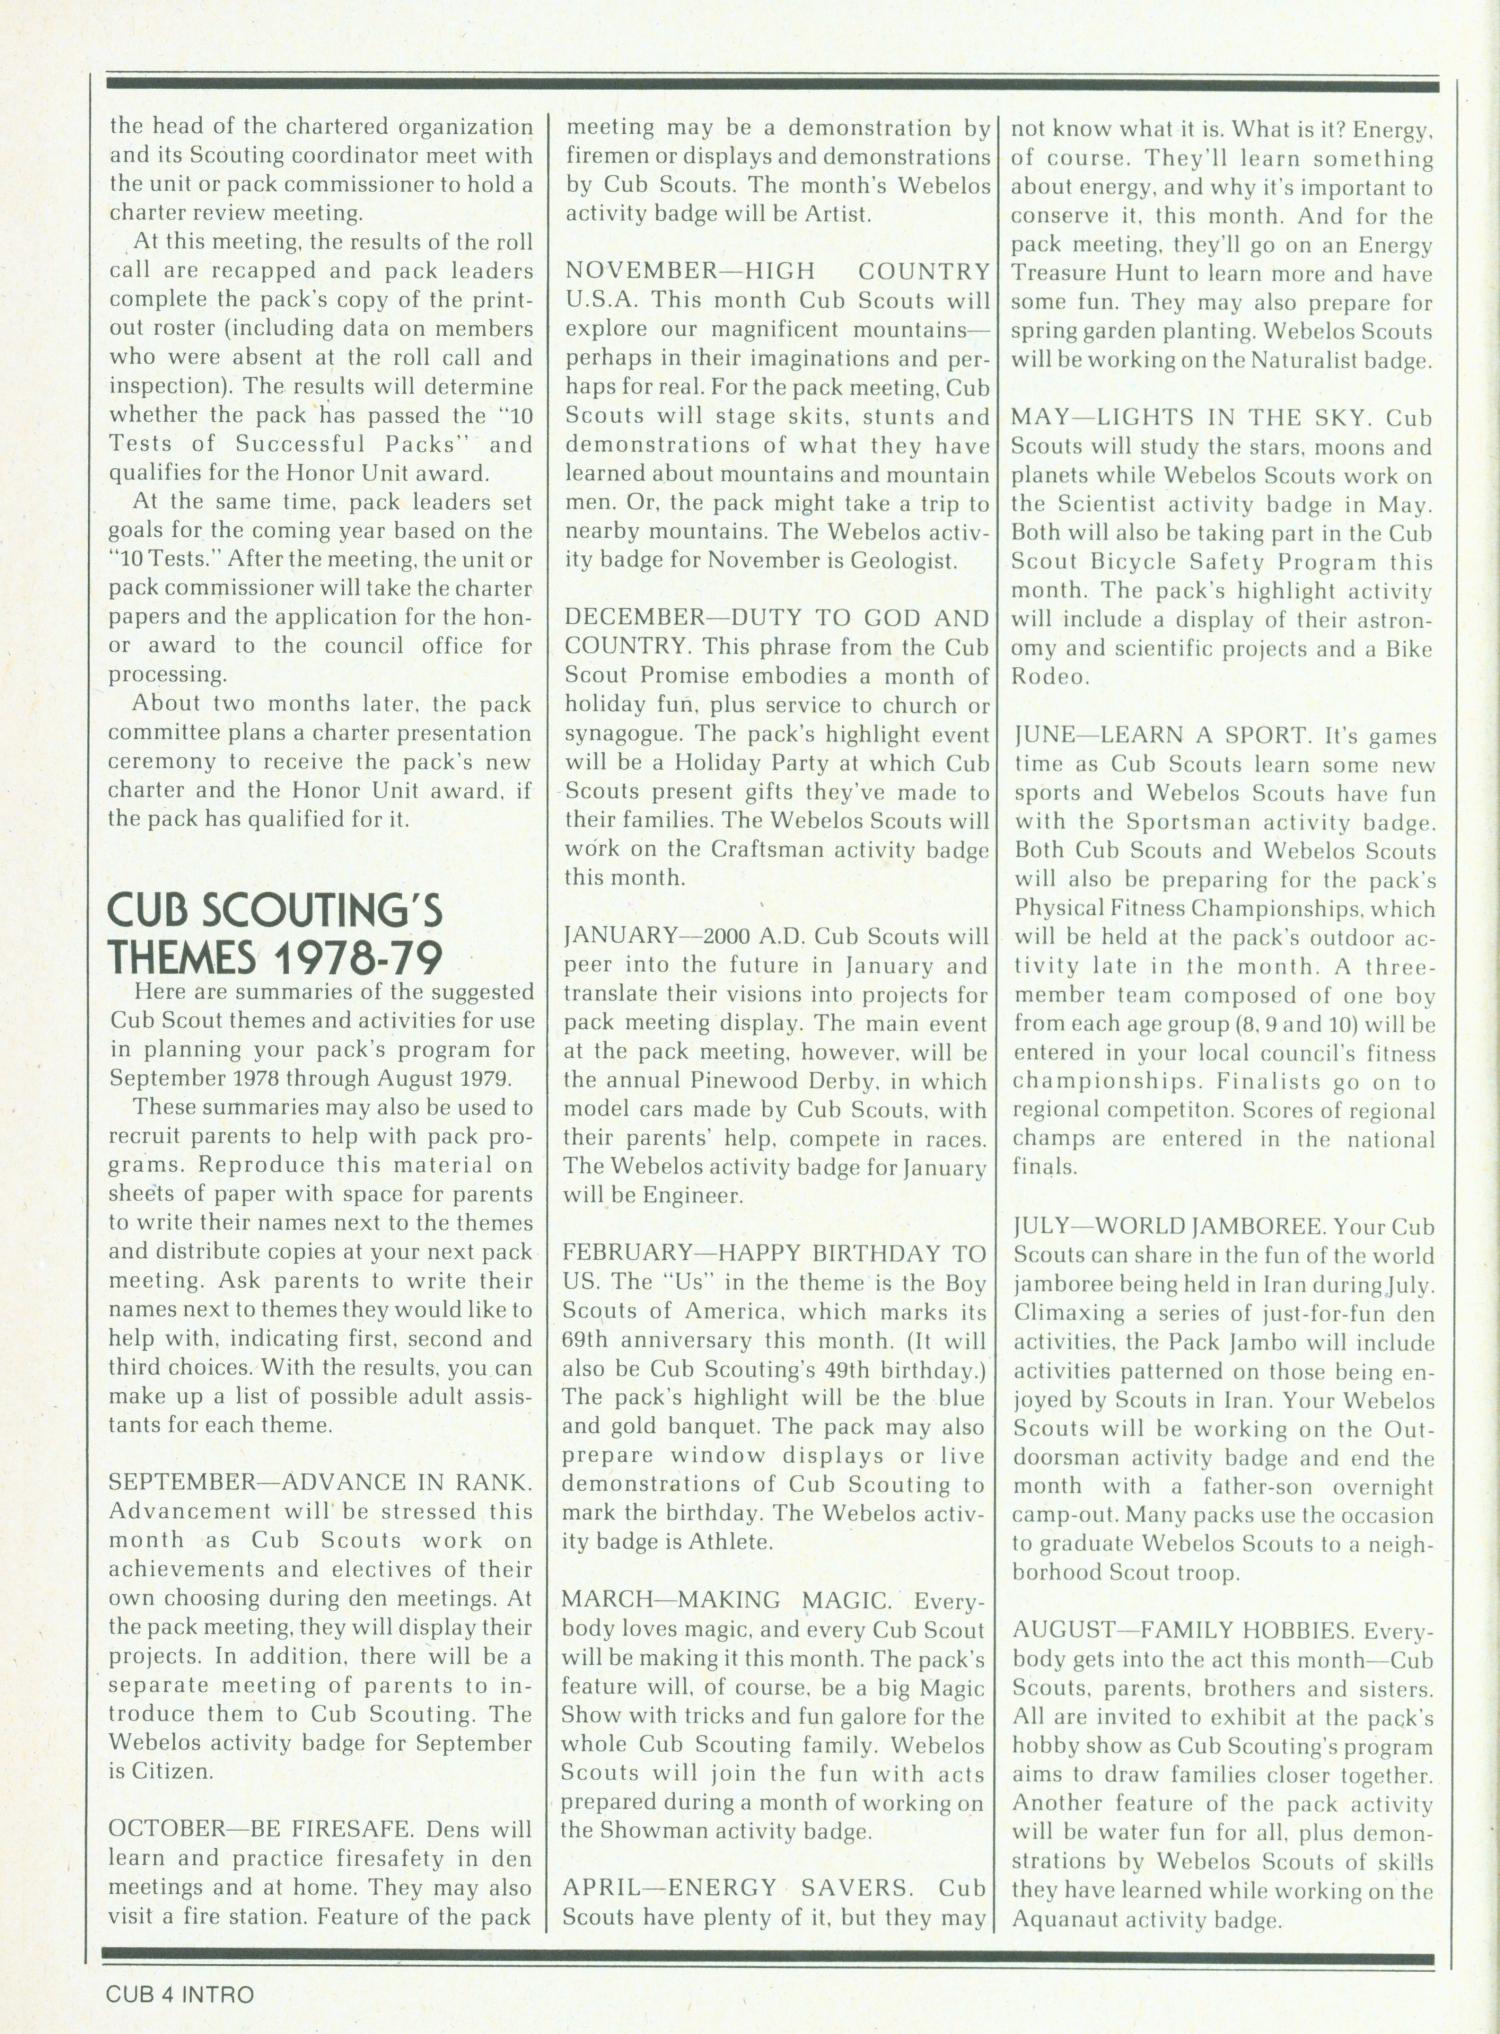 Scouting, Volume 66, Number 3, May-June 1978
                                                
                                                    4
                                                